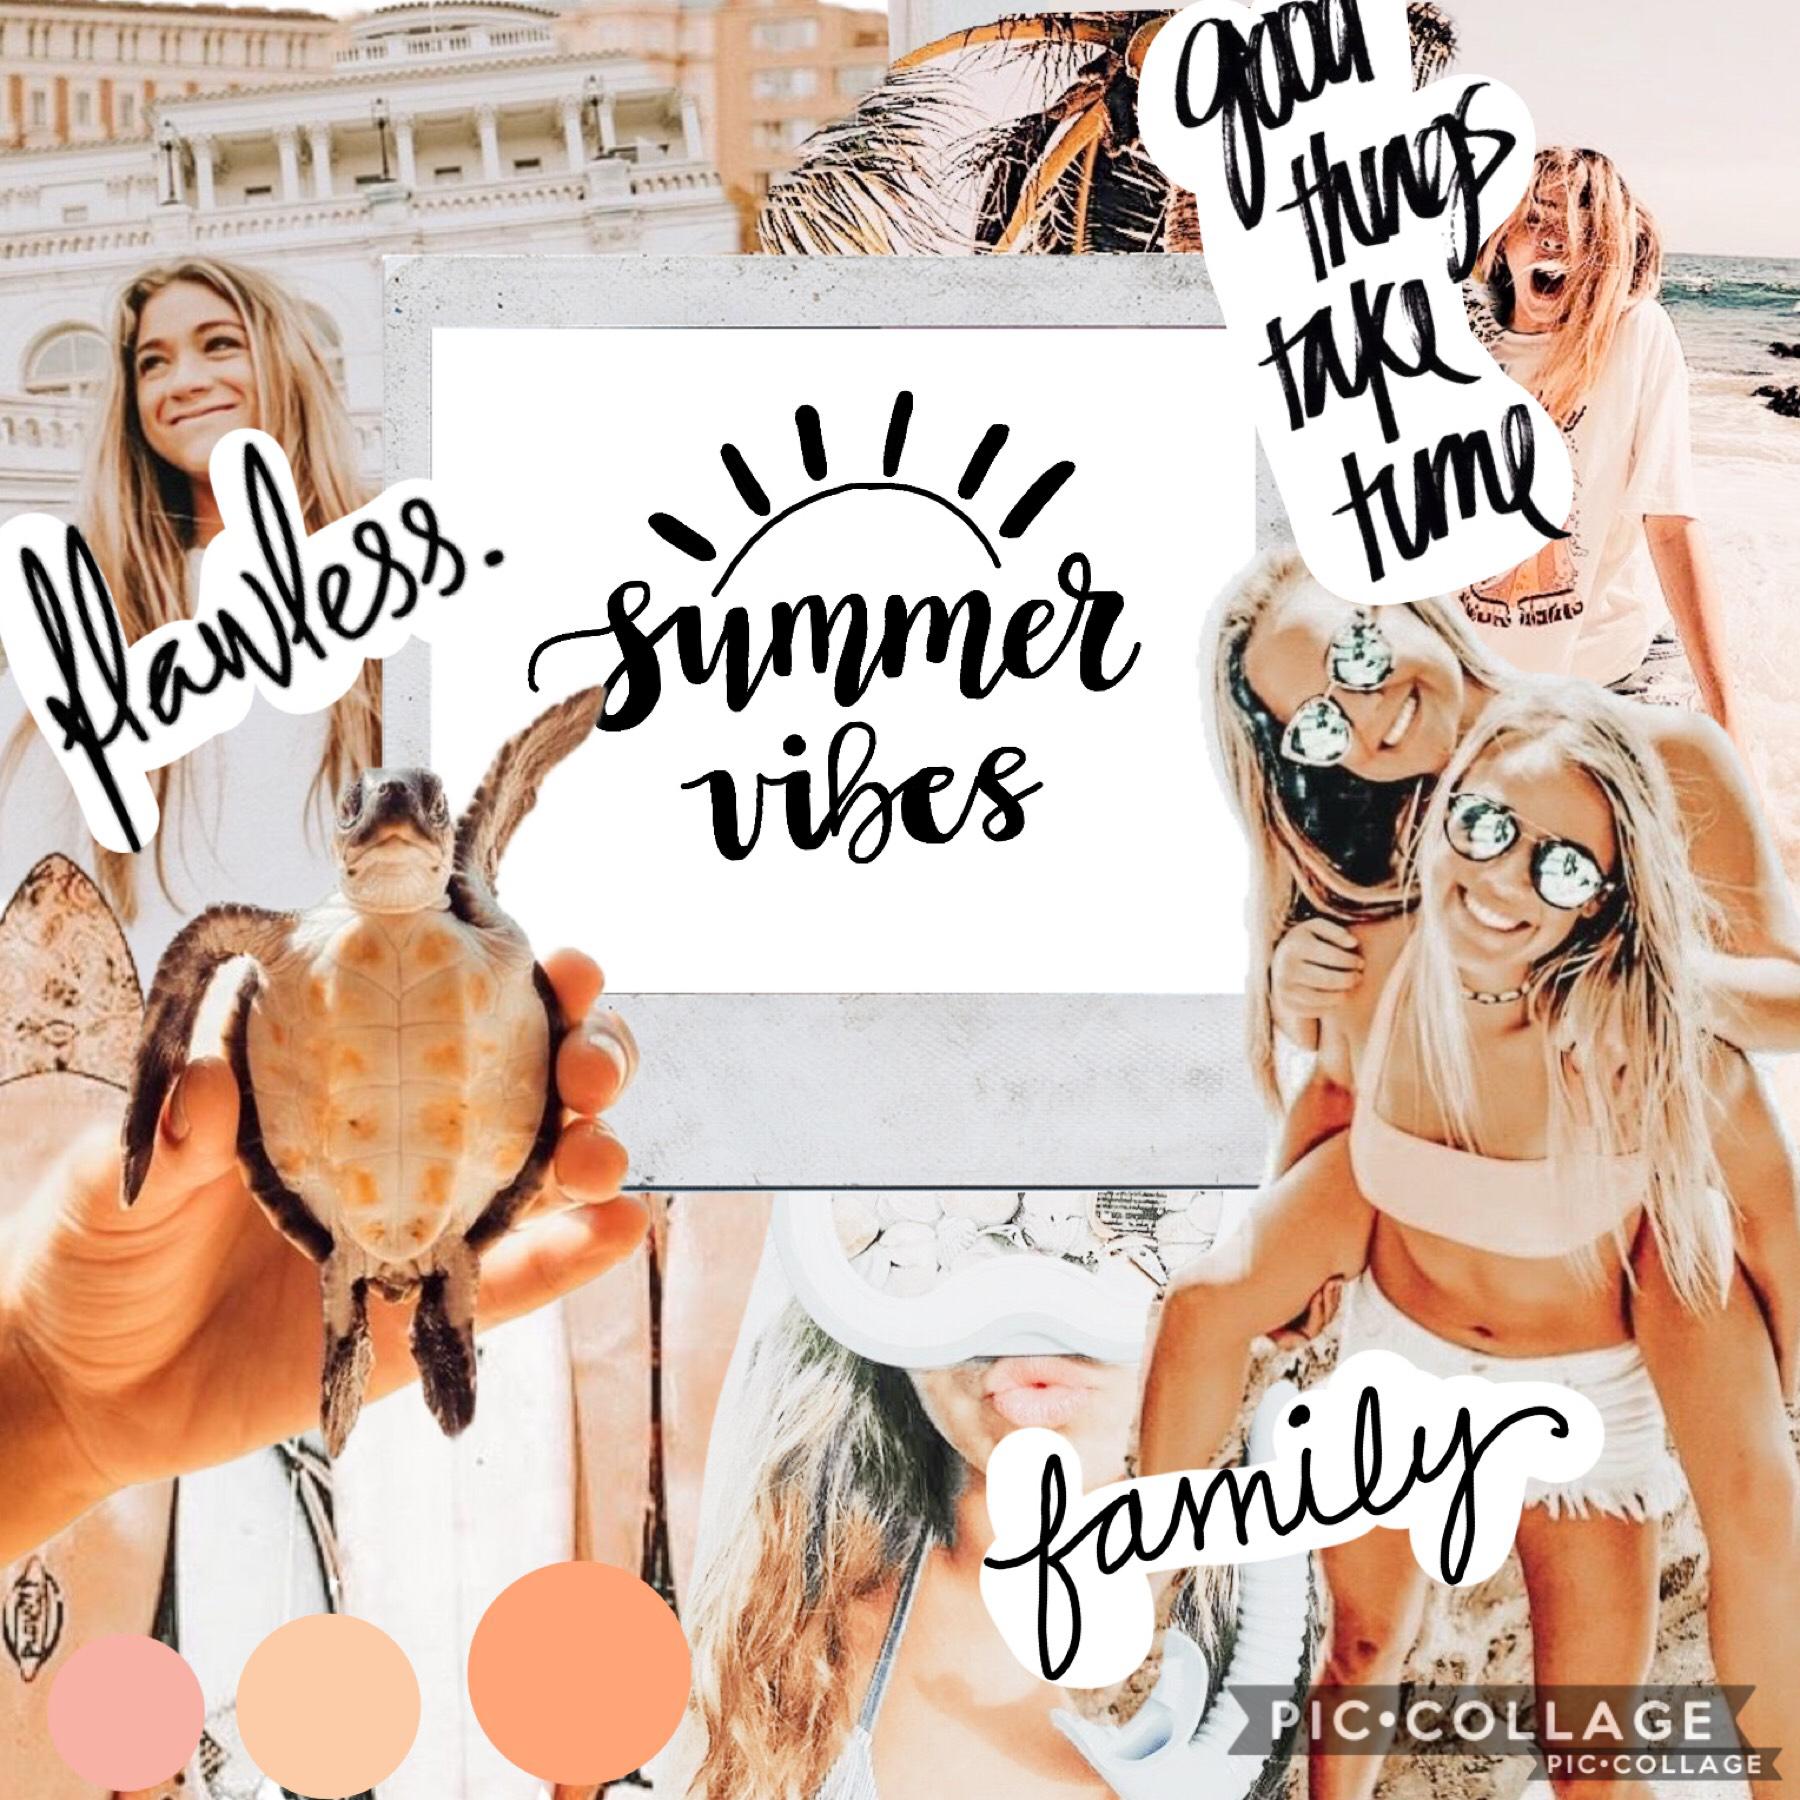 TAP

IT’S NOT SUMMER BUT...JUST FELT LIKE MAKING ONE..